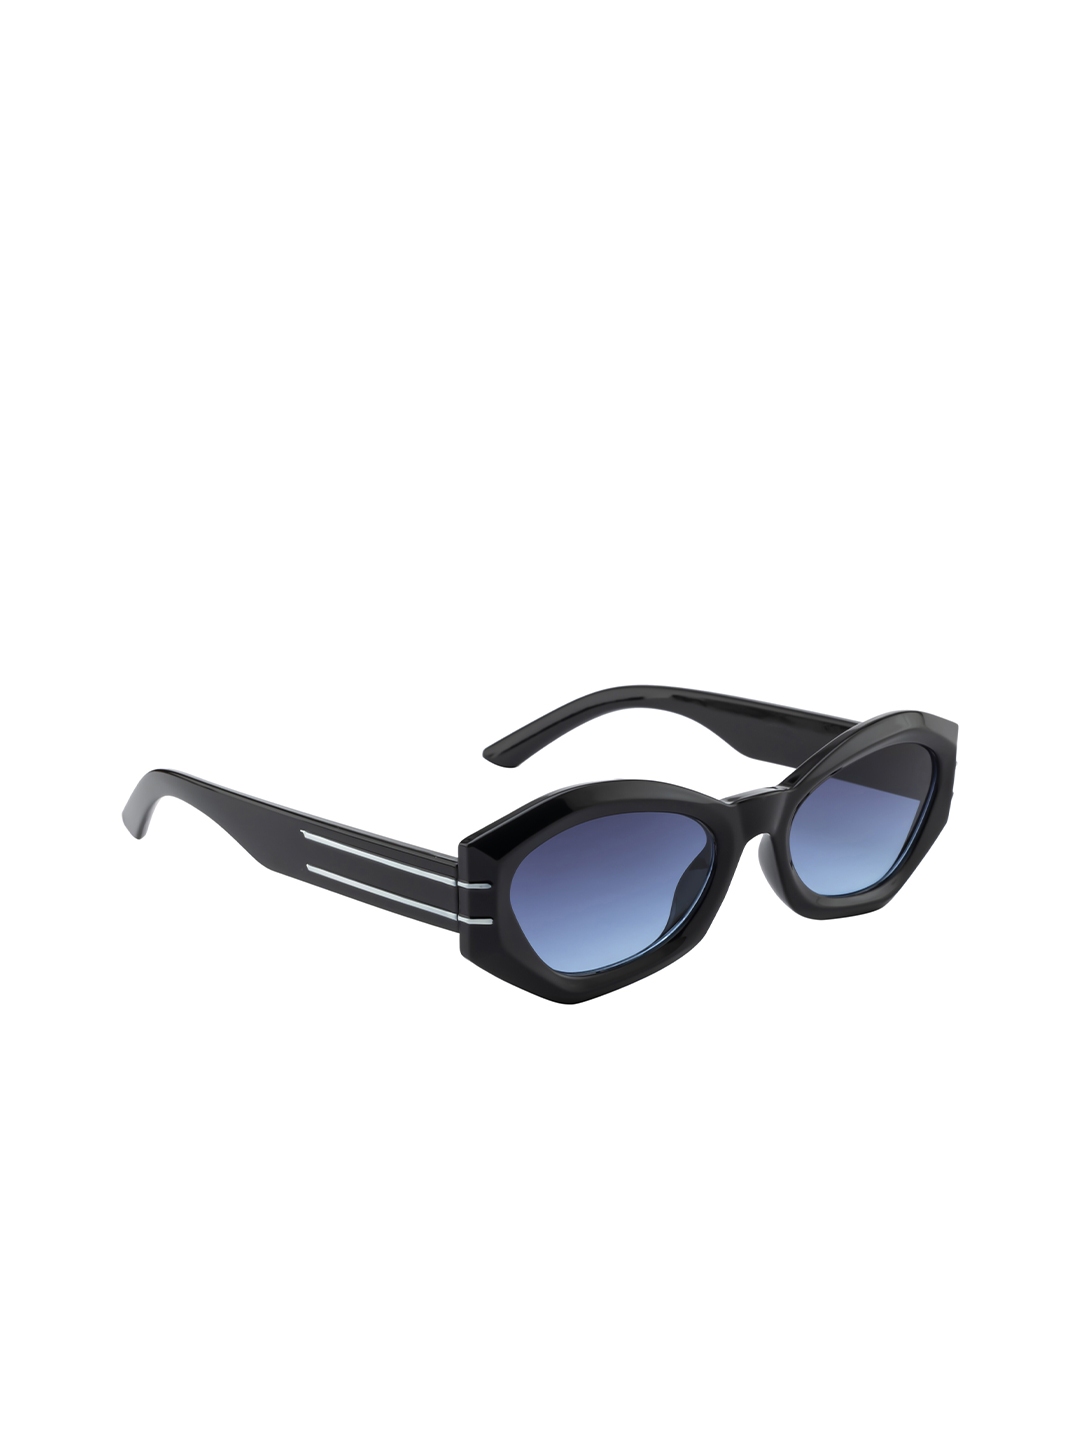 Buy Dressberry Women Lens And Black Cateye Sunglasses With Uv Protected Lens M23146 Sunglasses